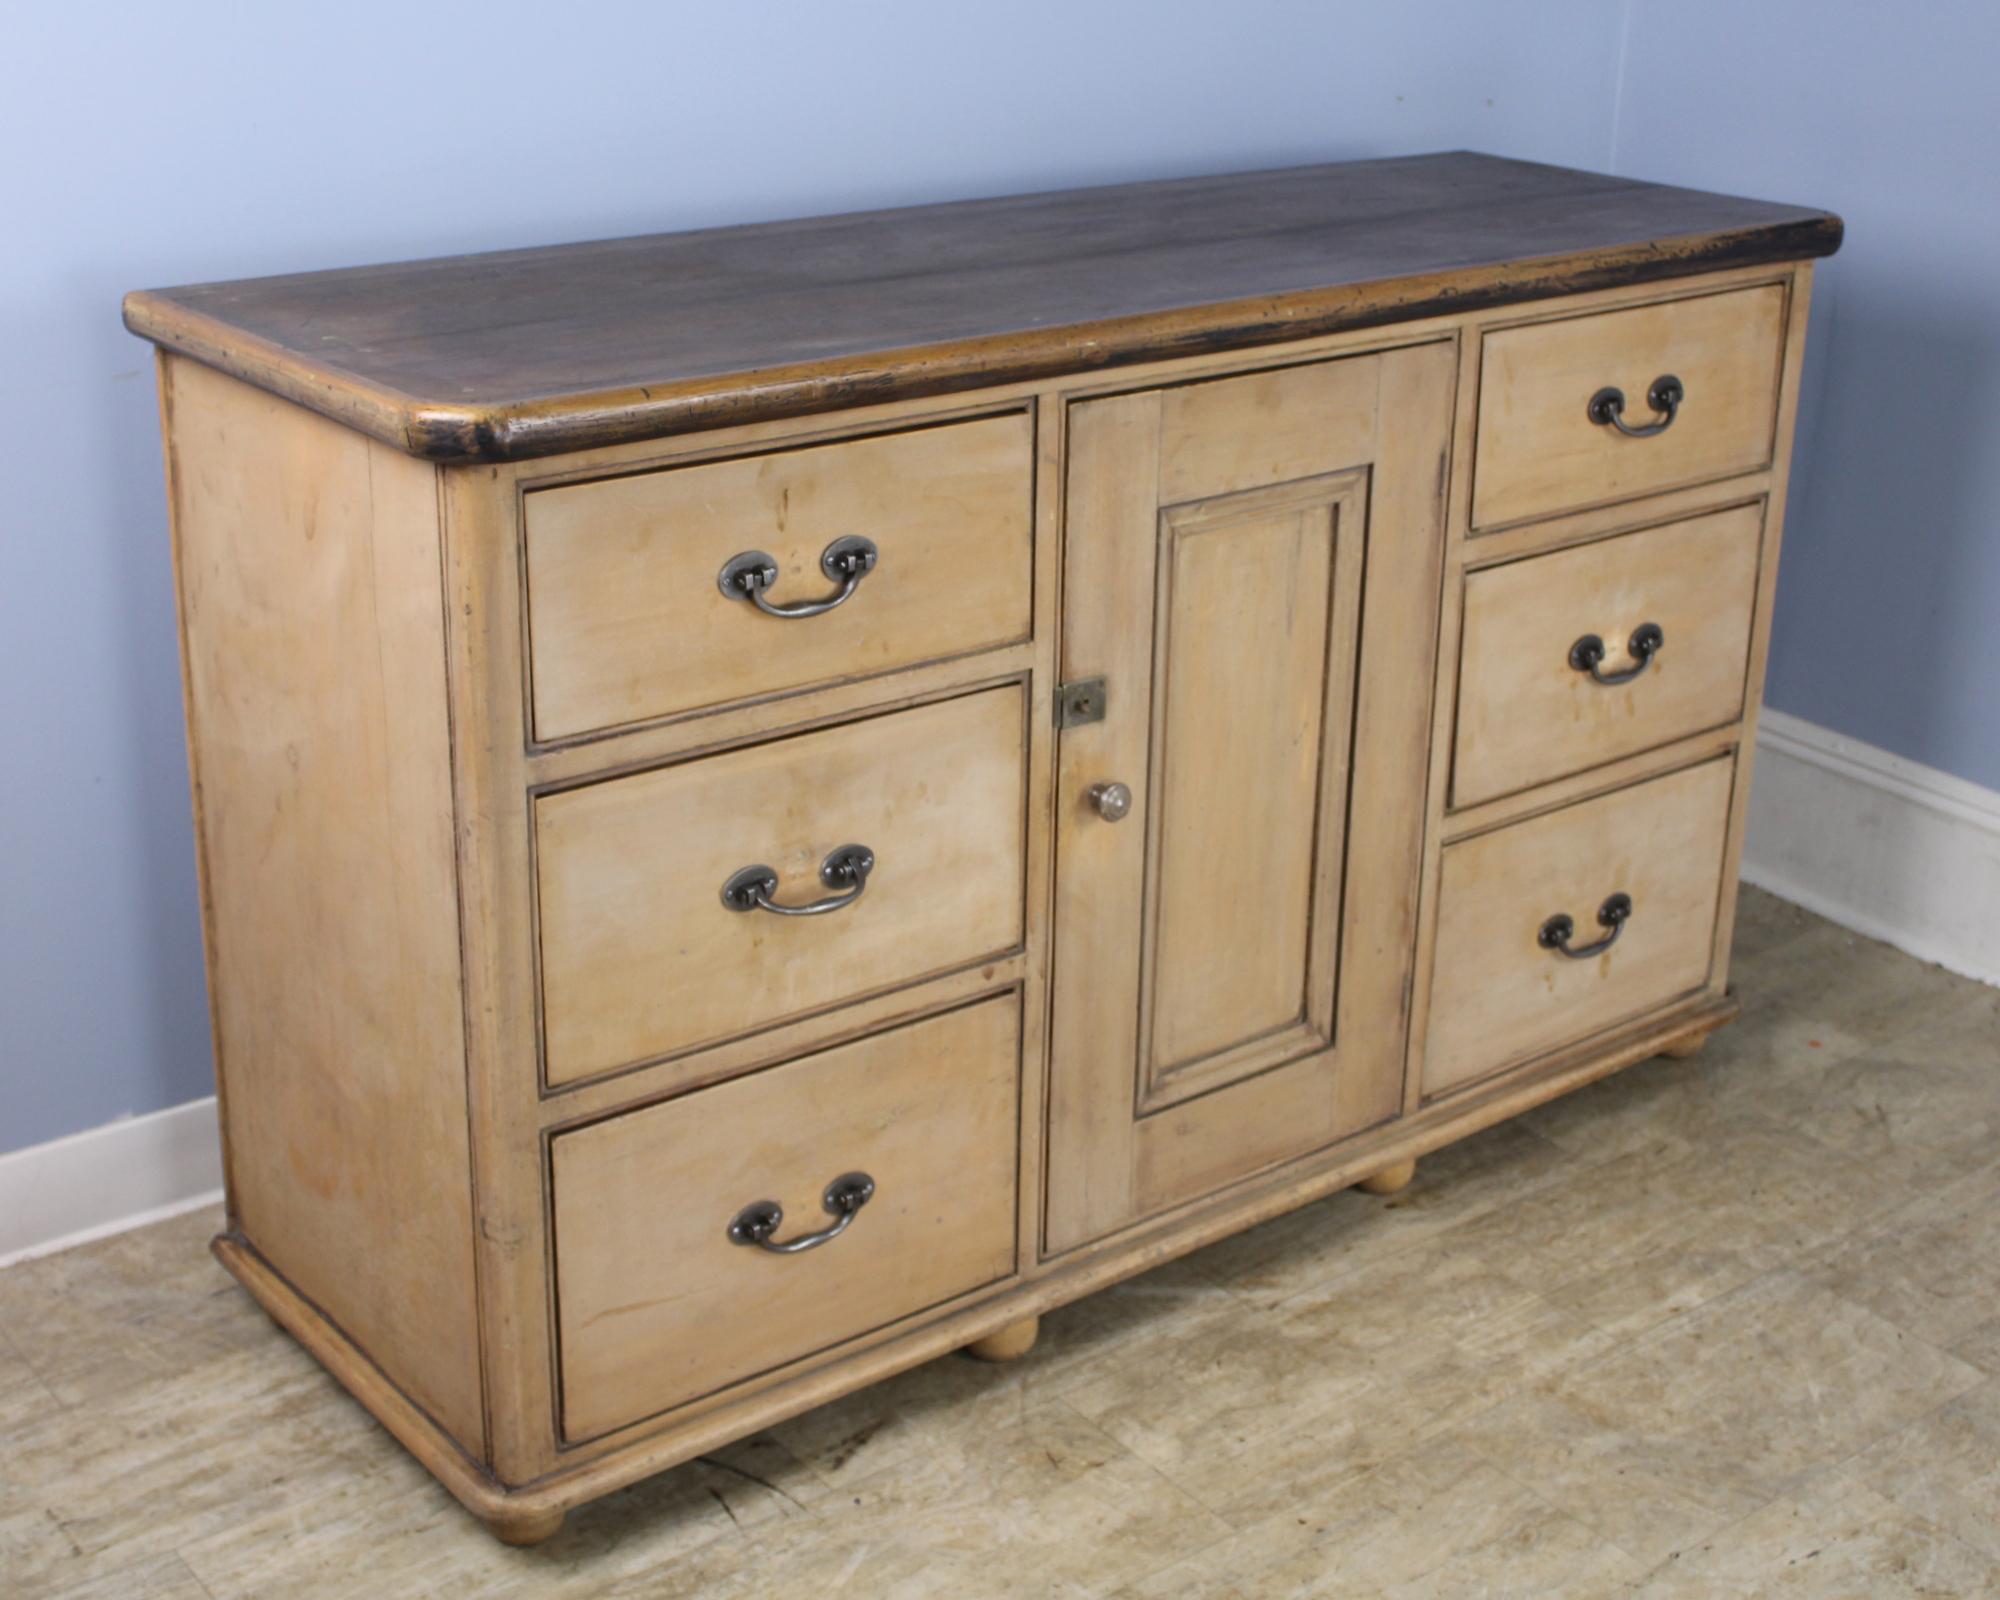 A highly versatile Victorian sideboard, cupboard or buffet. Original peach/beige paint has been rubbed back for a clean look. Wonderful thick pine top with good patina and mild interesting distress. Six deep roomy drawers and a center cupboard